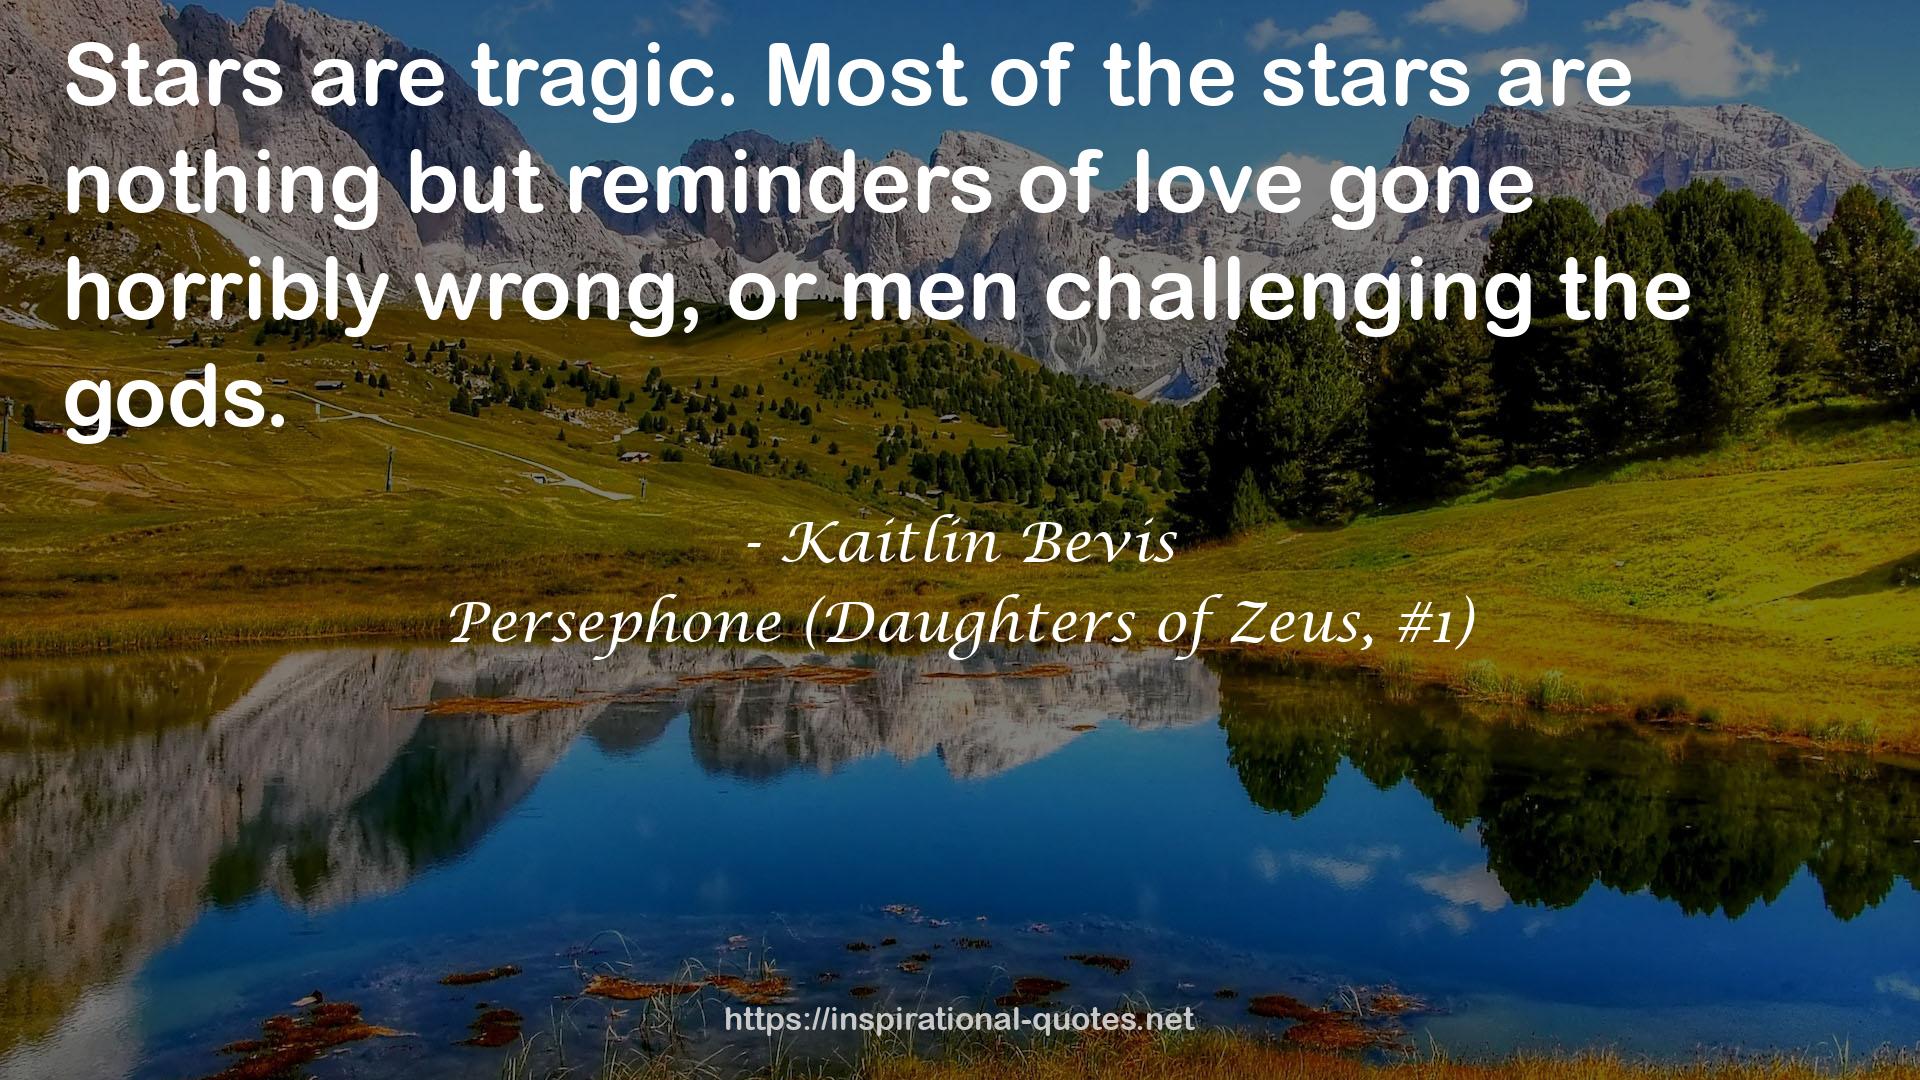 Kaitlin Bevis QUOTES